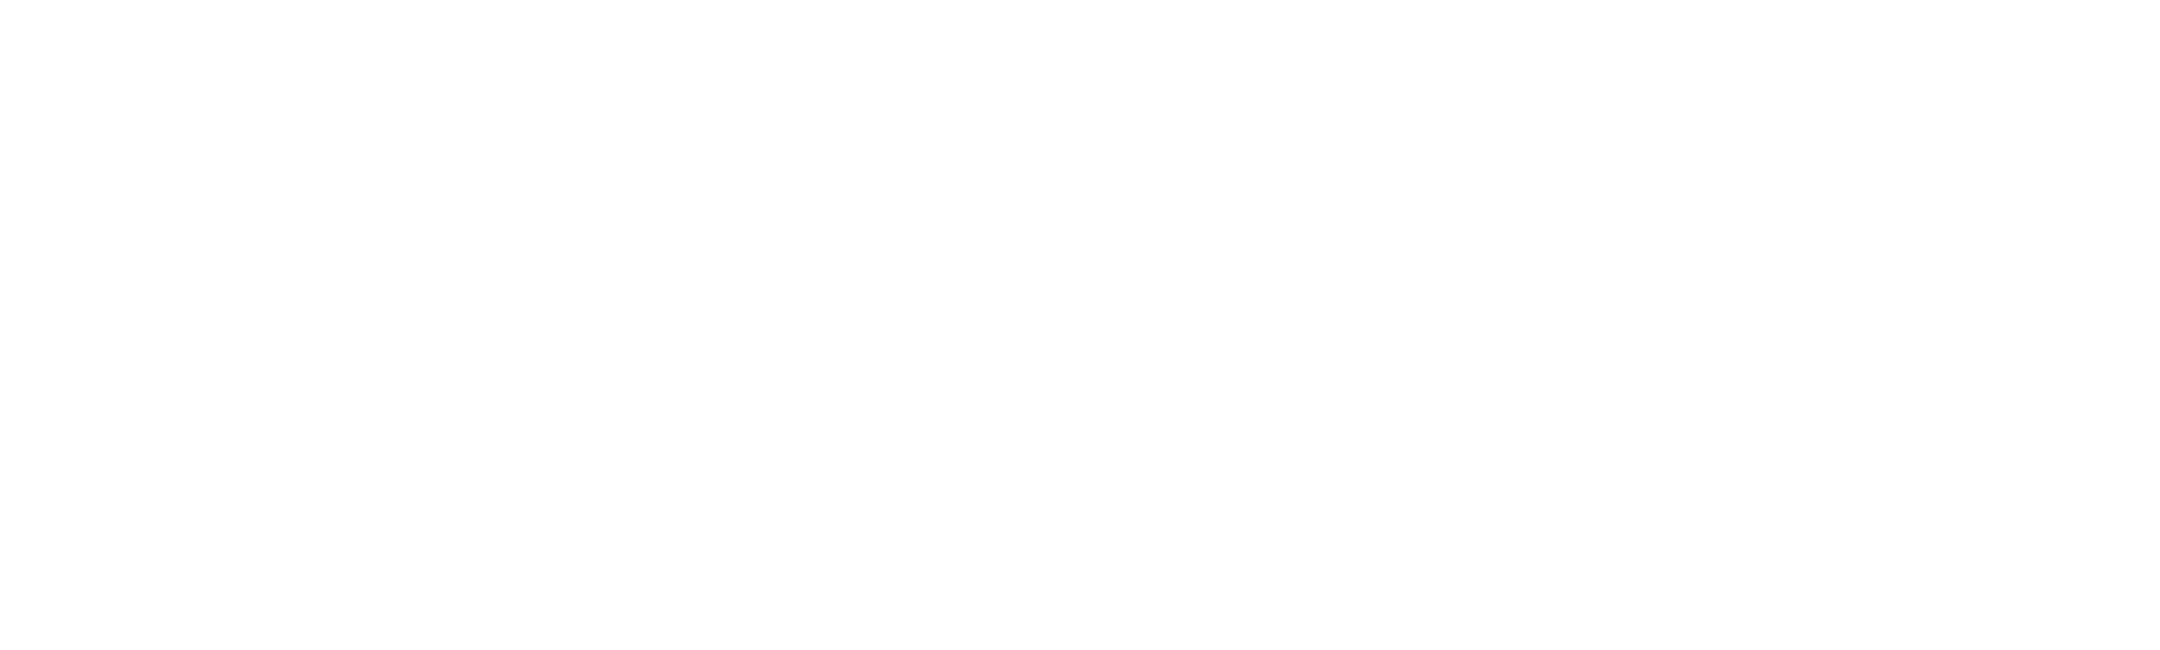 Frequently Asked Questions - FSFPAY.com